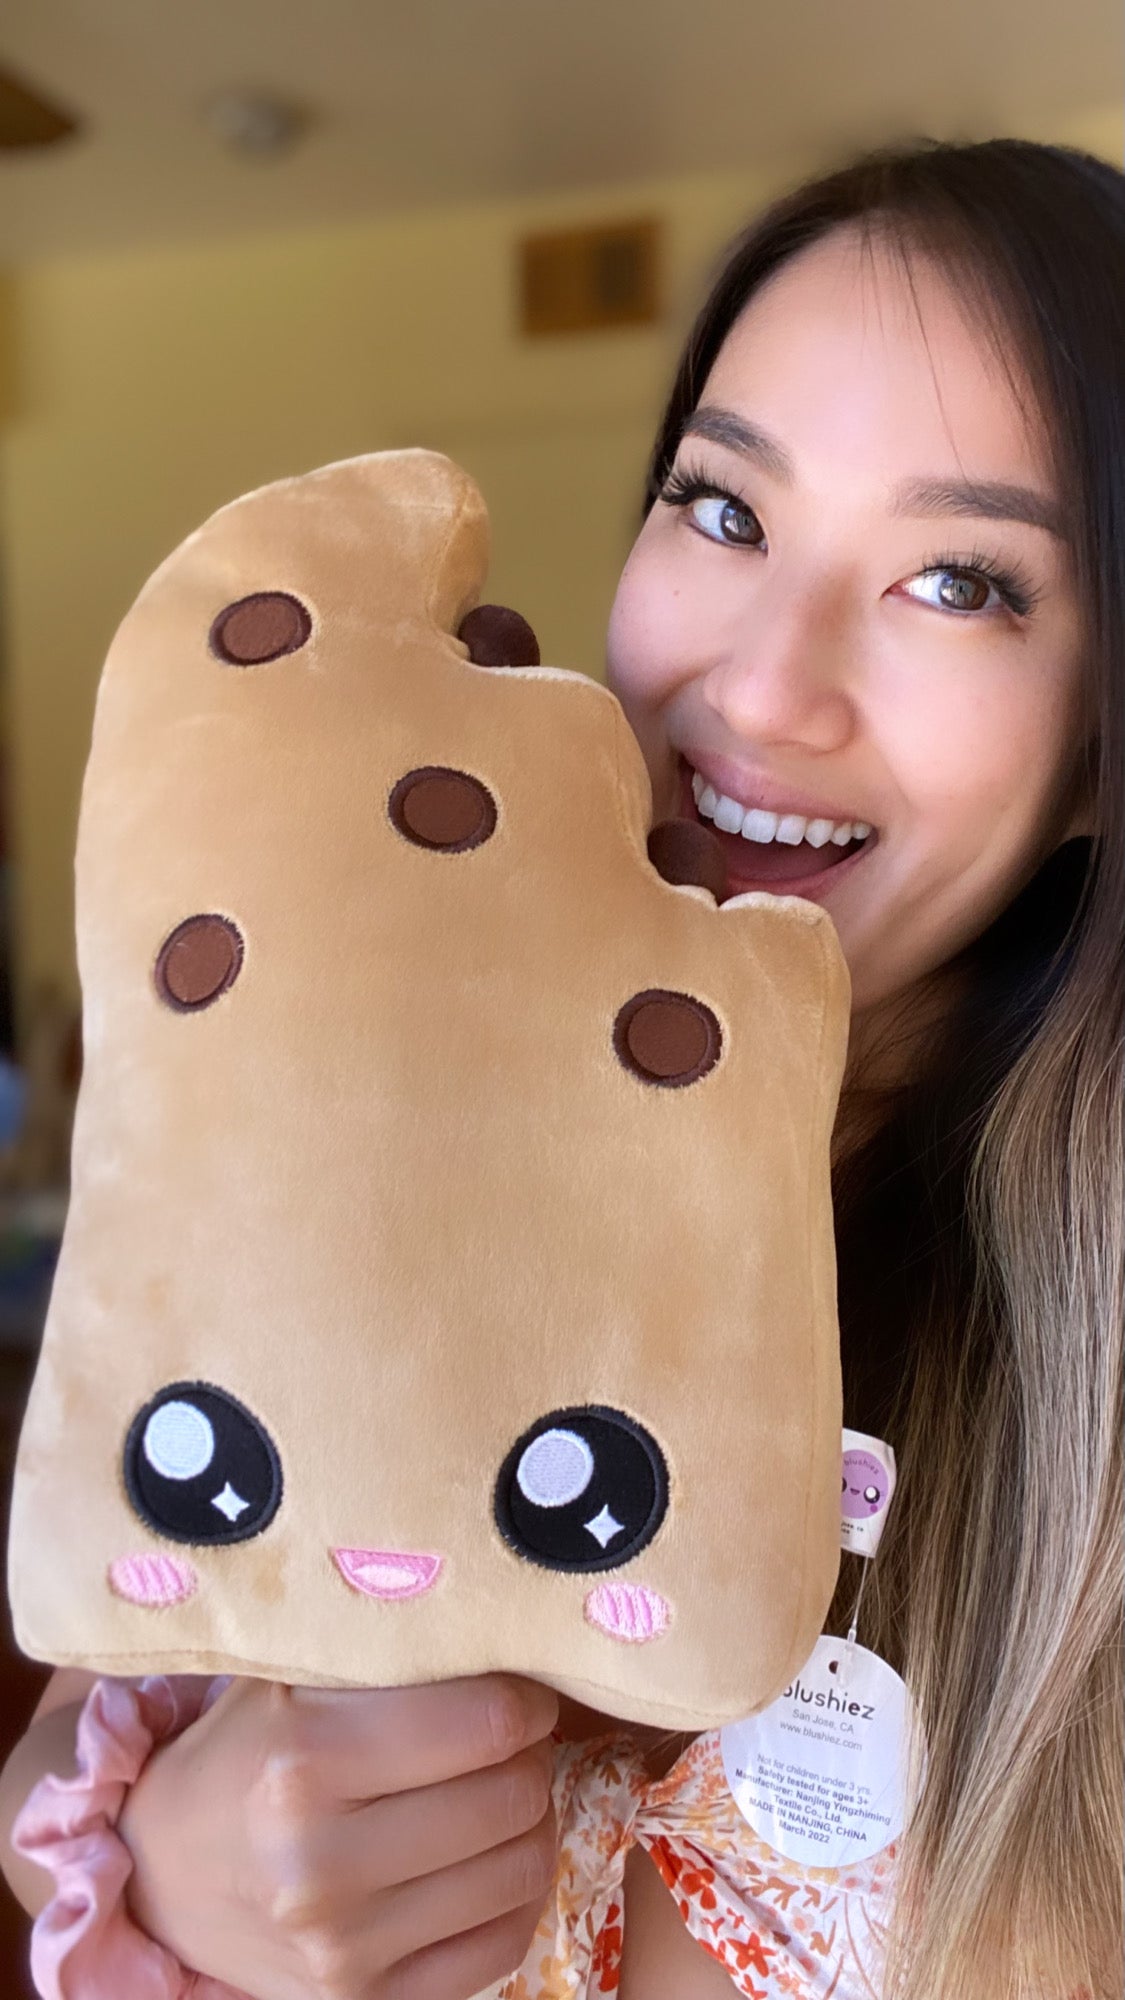 Woman holding a plush toy of a boba ice cream bar with a cute open-mouth smiling face. The plush toy is shaped like an ice cream bar with a bite taken out of the top right corner. The woman is smiling and appears to be taking a playful bite out of the corner.